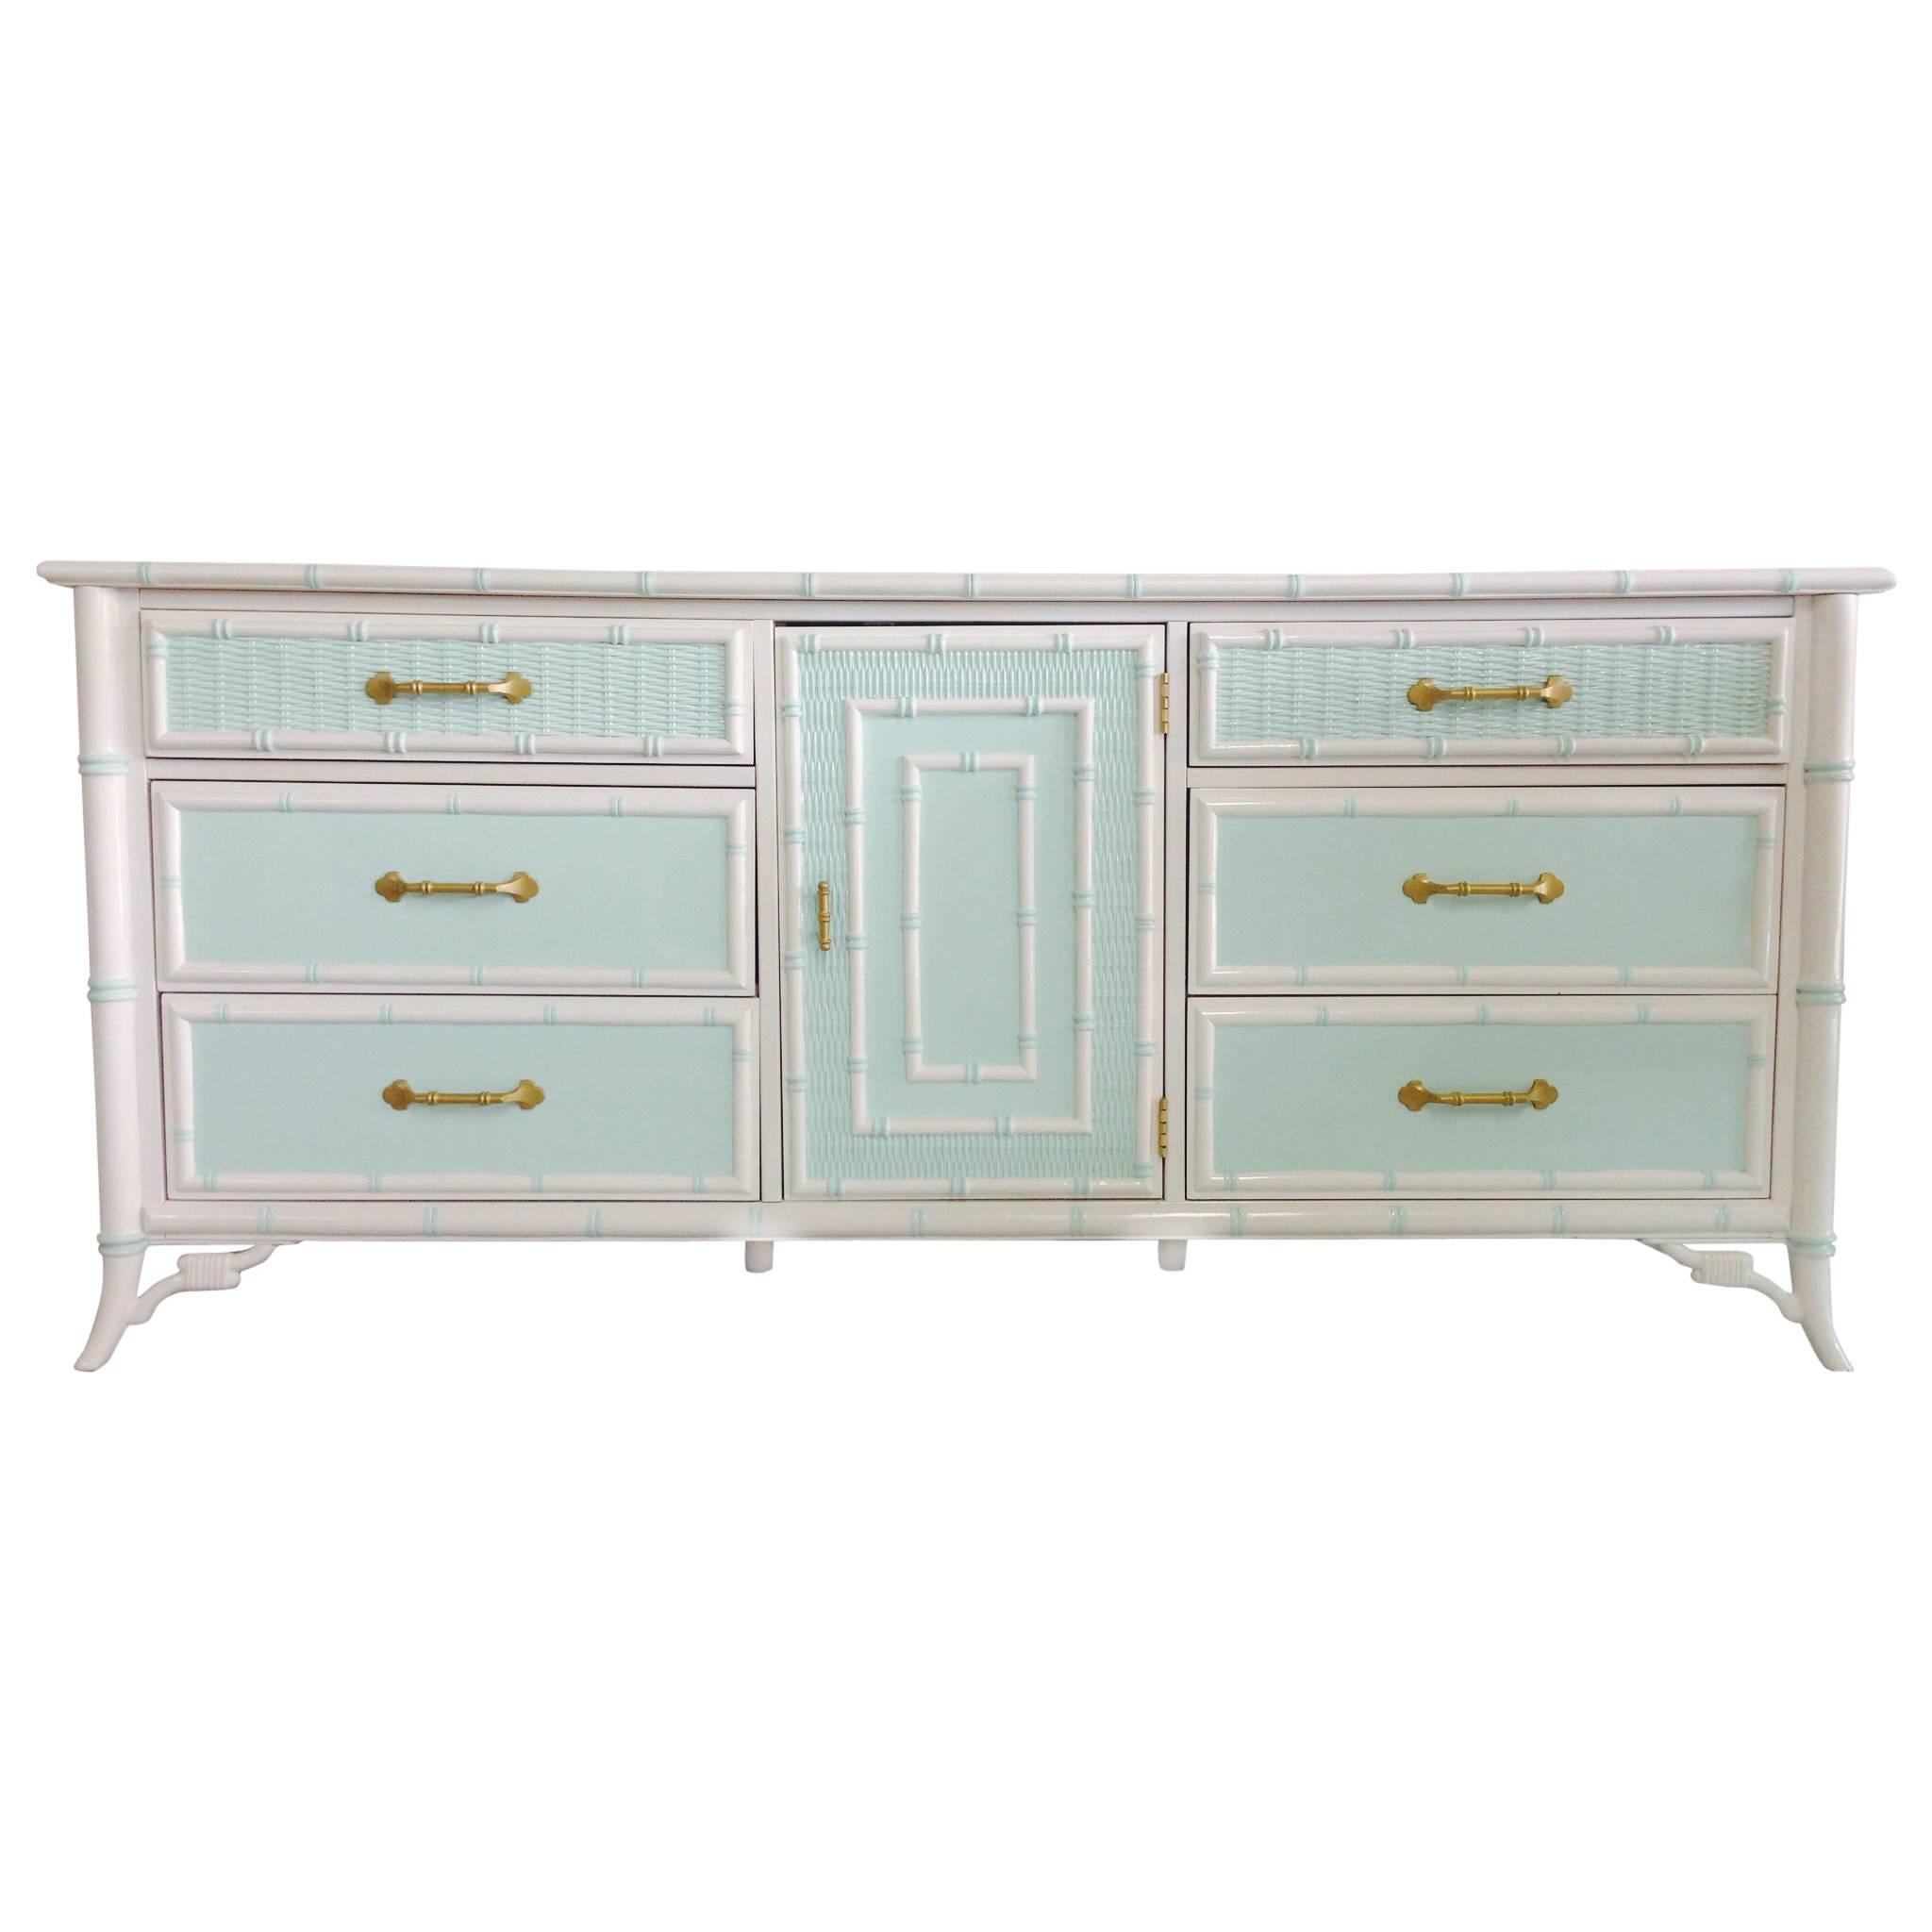 Vintage Lacquered Mint and White Faux-Bamboo Credenza or Sideboard